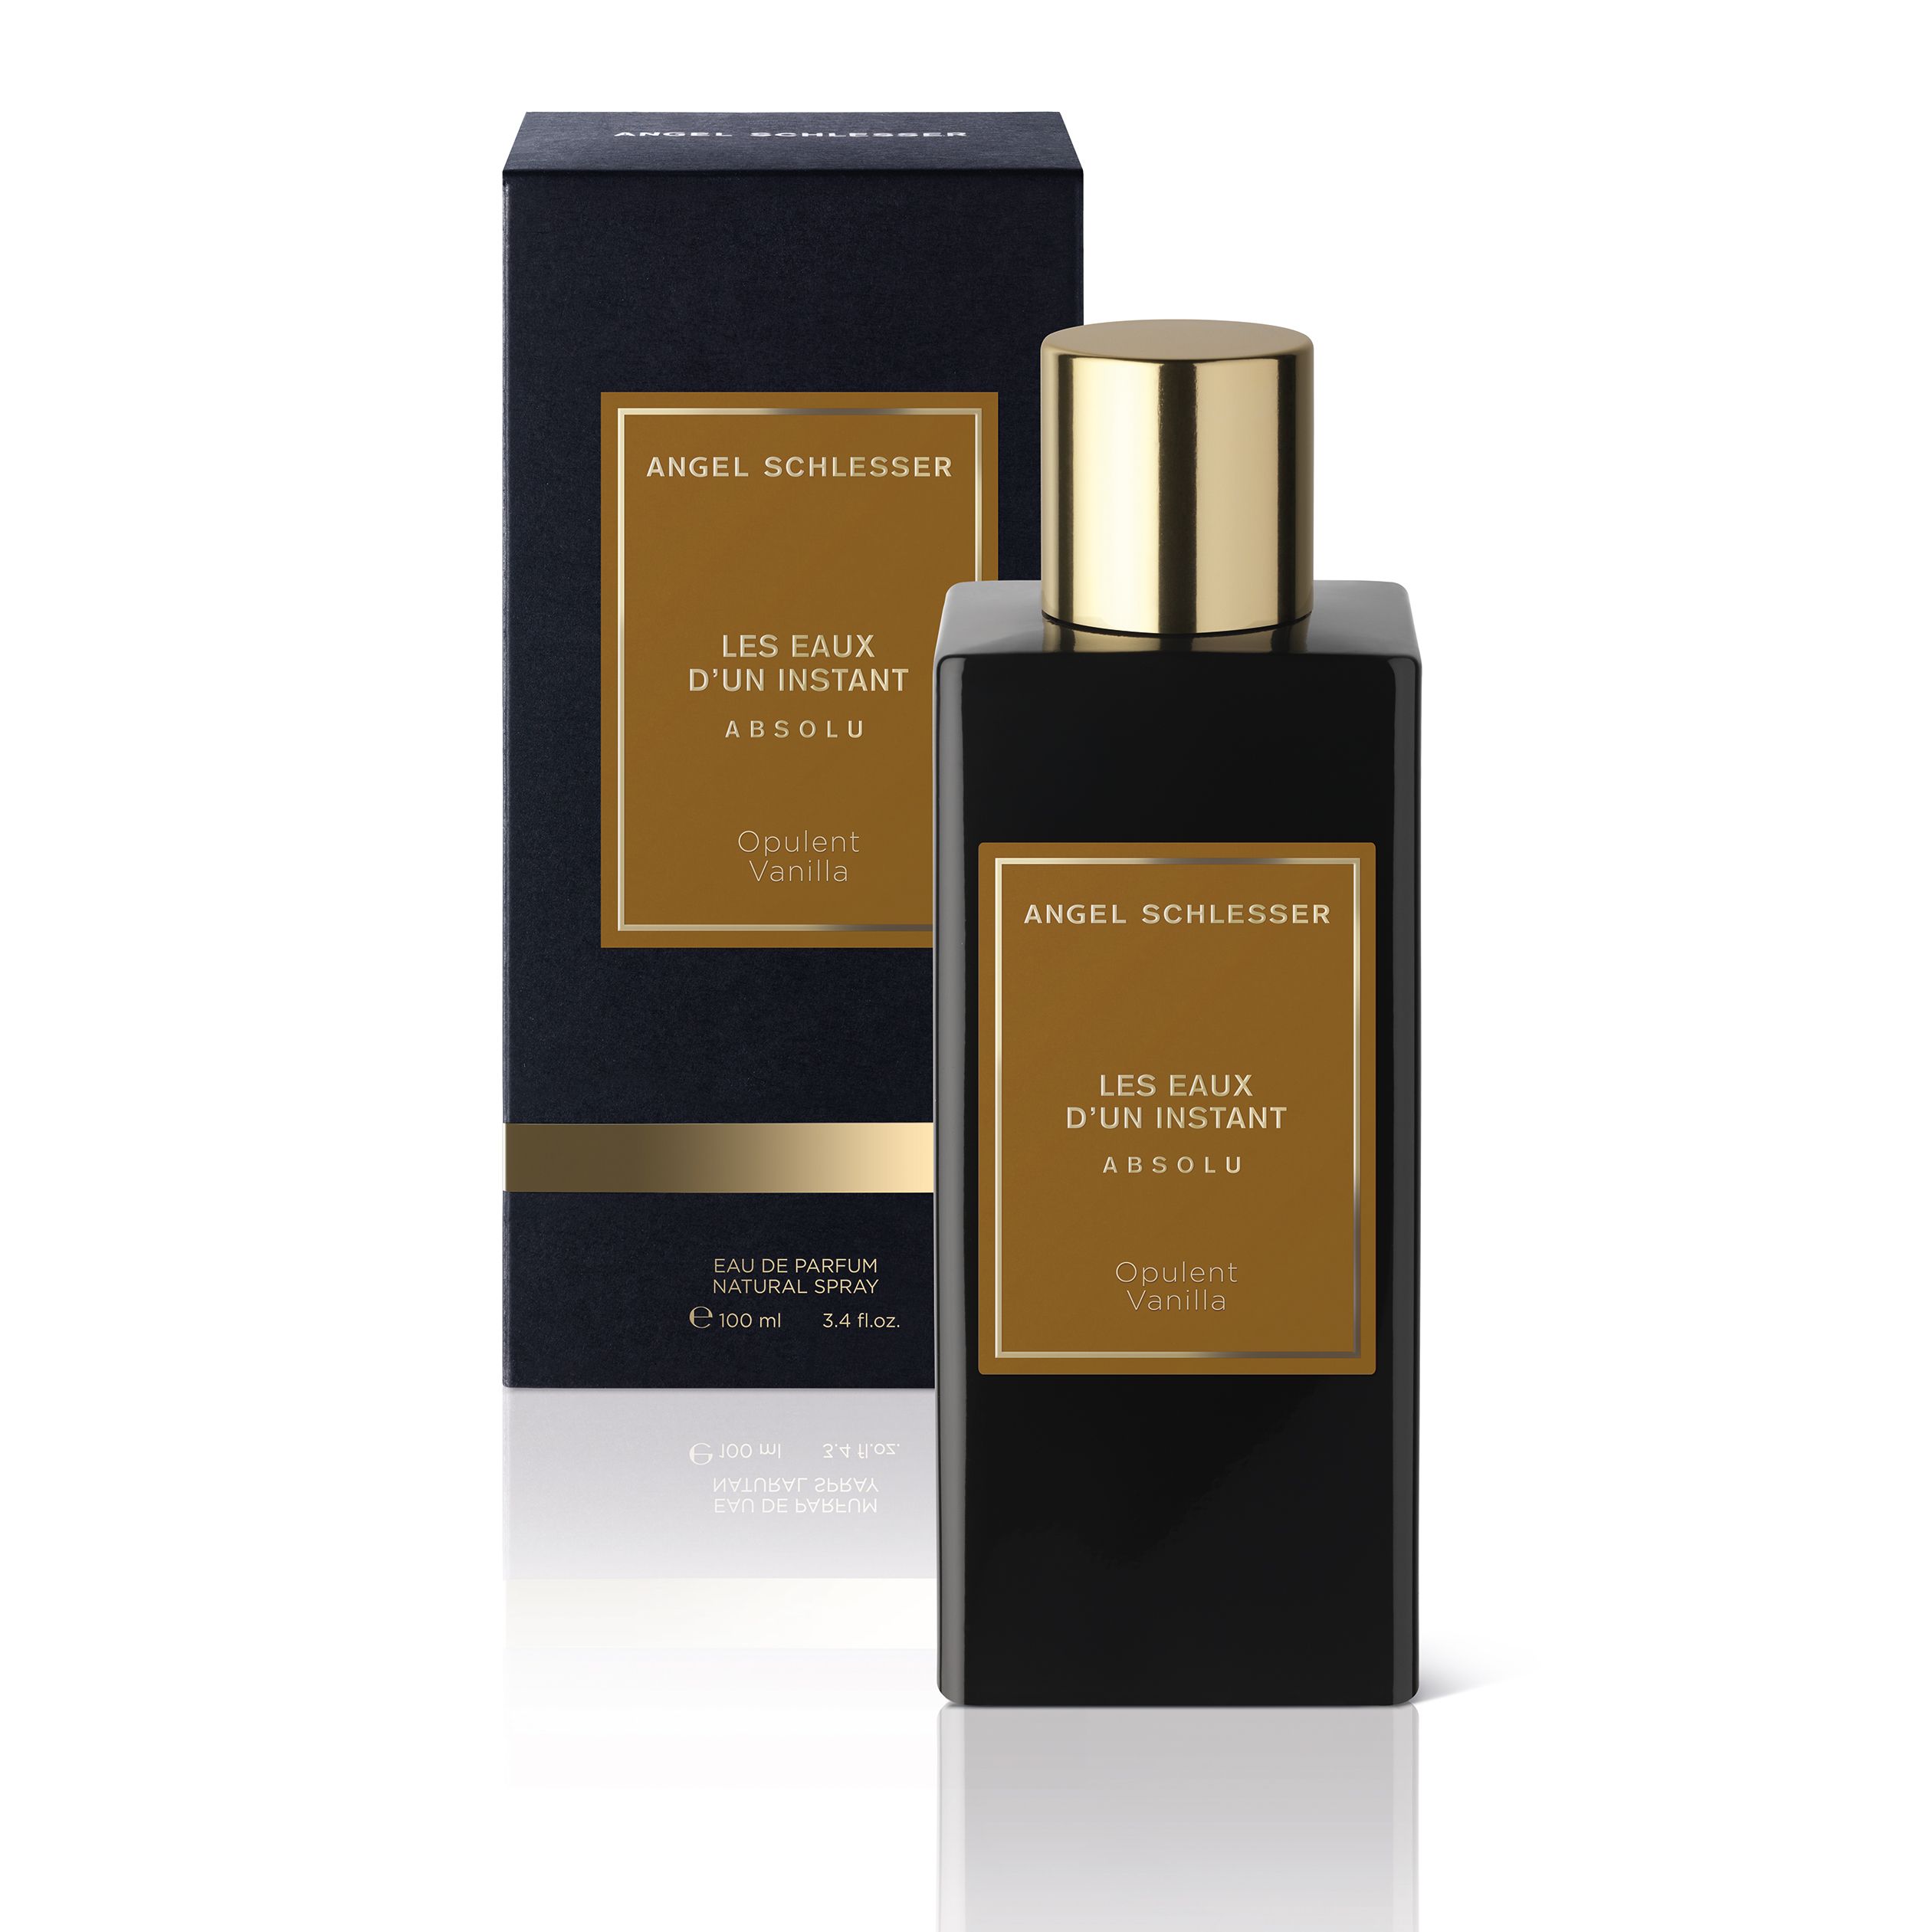 Opulent Vanilla Angel Schlesser perfume - a new fragrance for women and ...